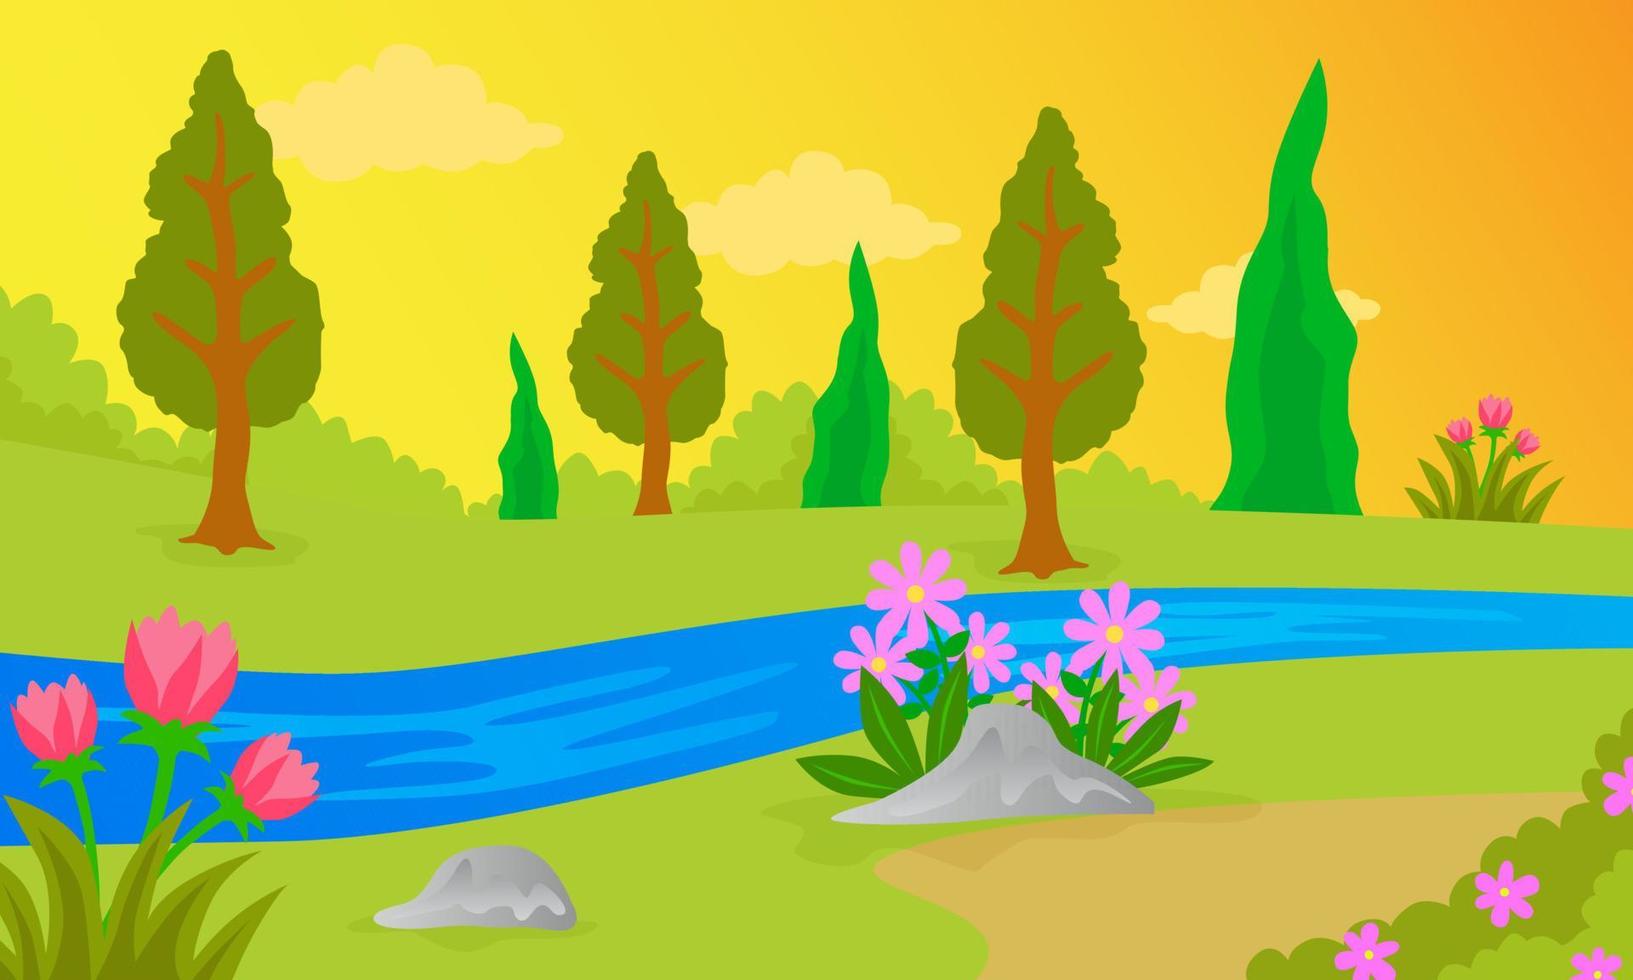 natural scenery illustrations, sunsets, trees, meadows, rocks, flowers, orange skies, clouds, children's book illustrations, posters, websites, mobile applications vector